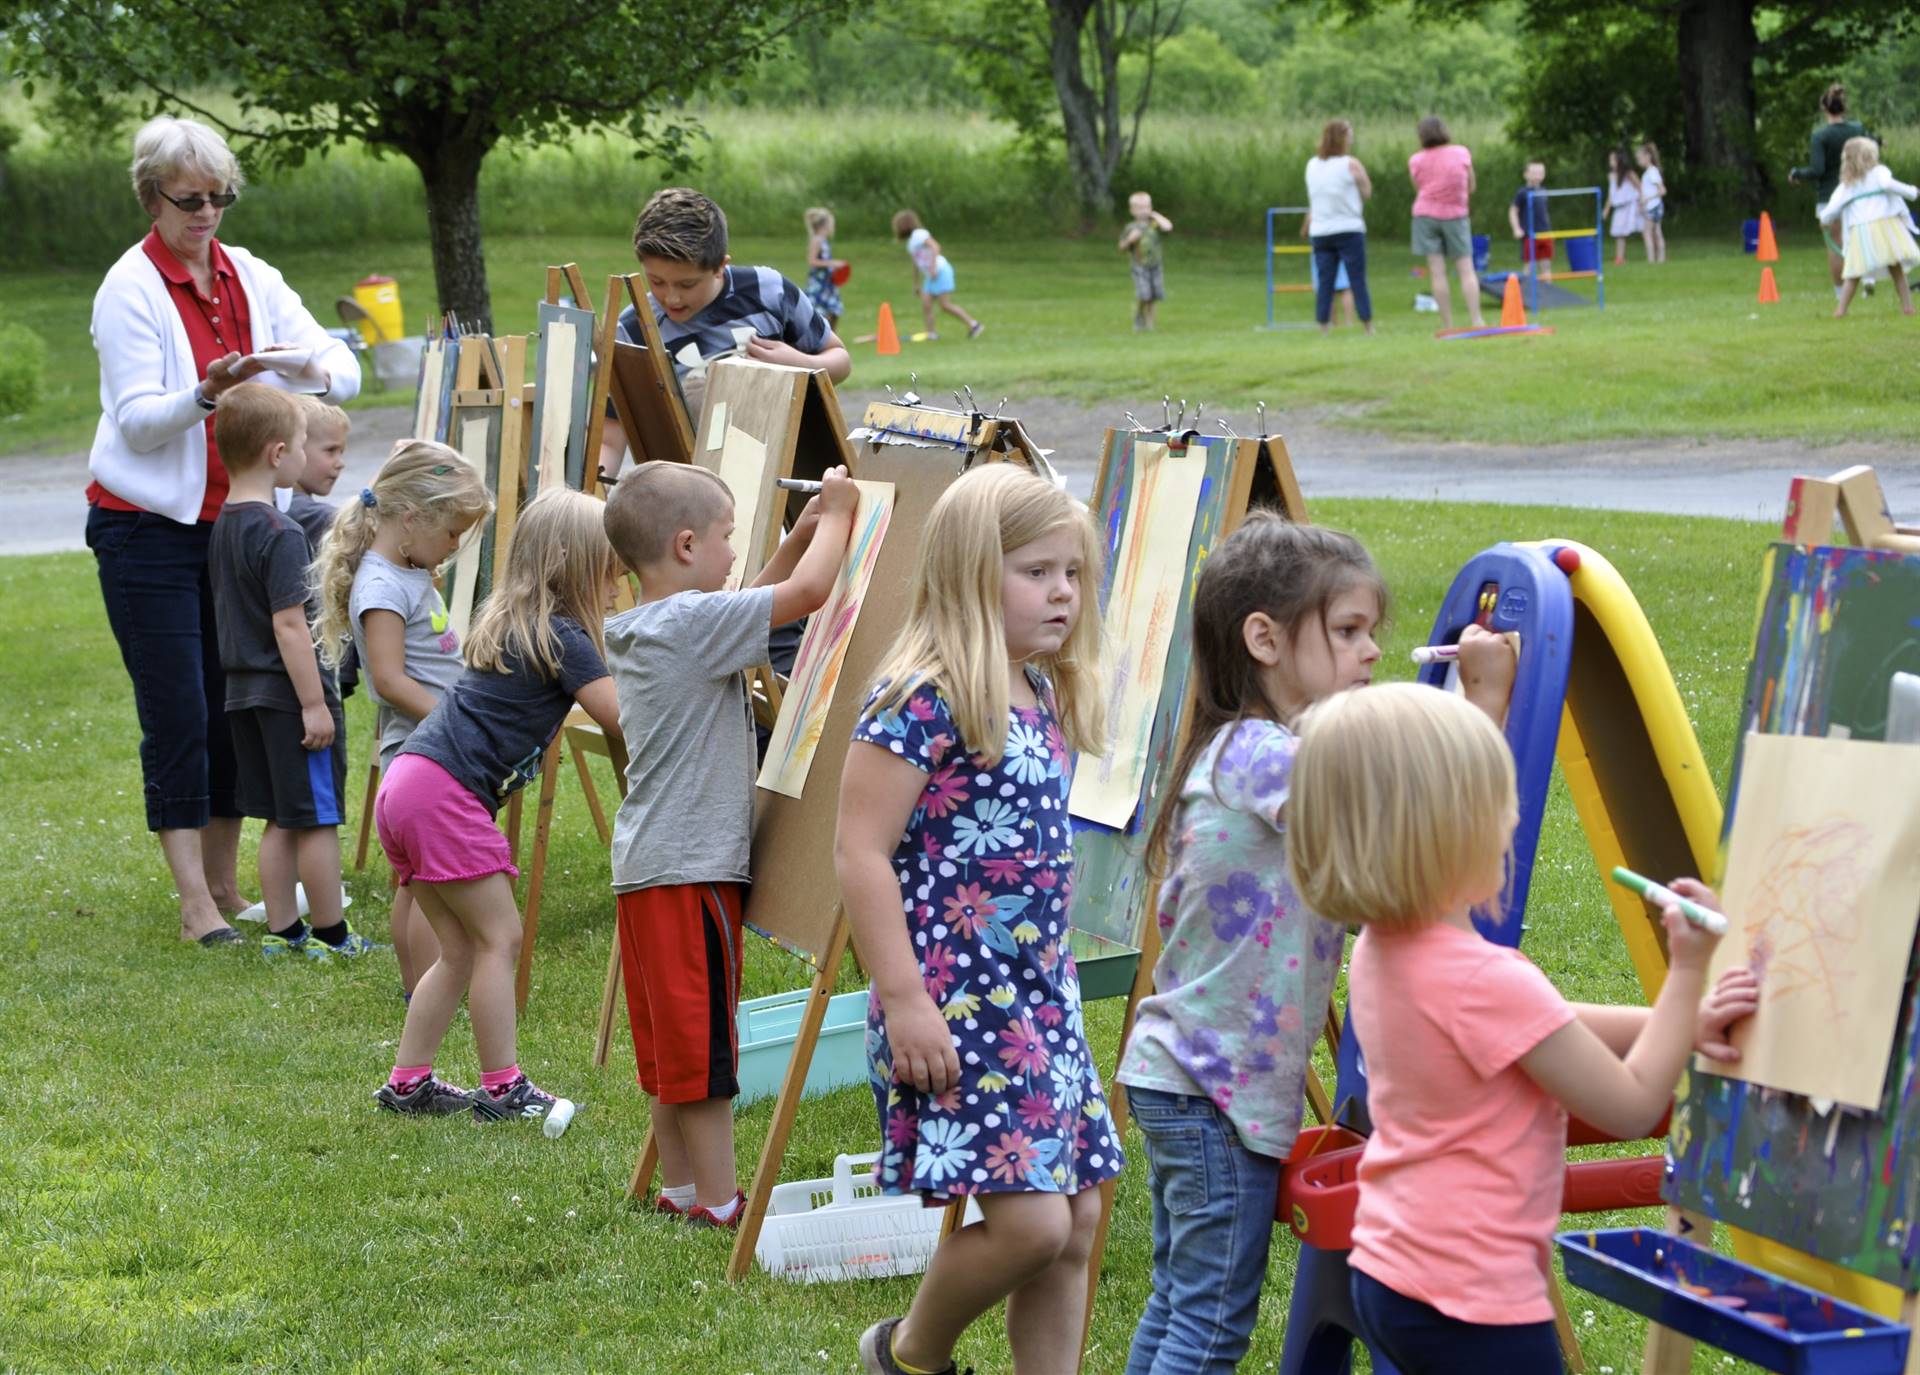 Art time as students draw on easels outdoors.